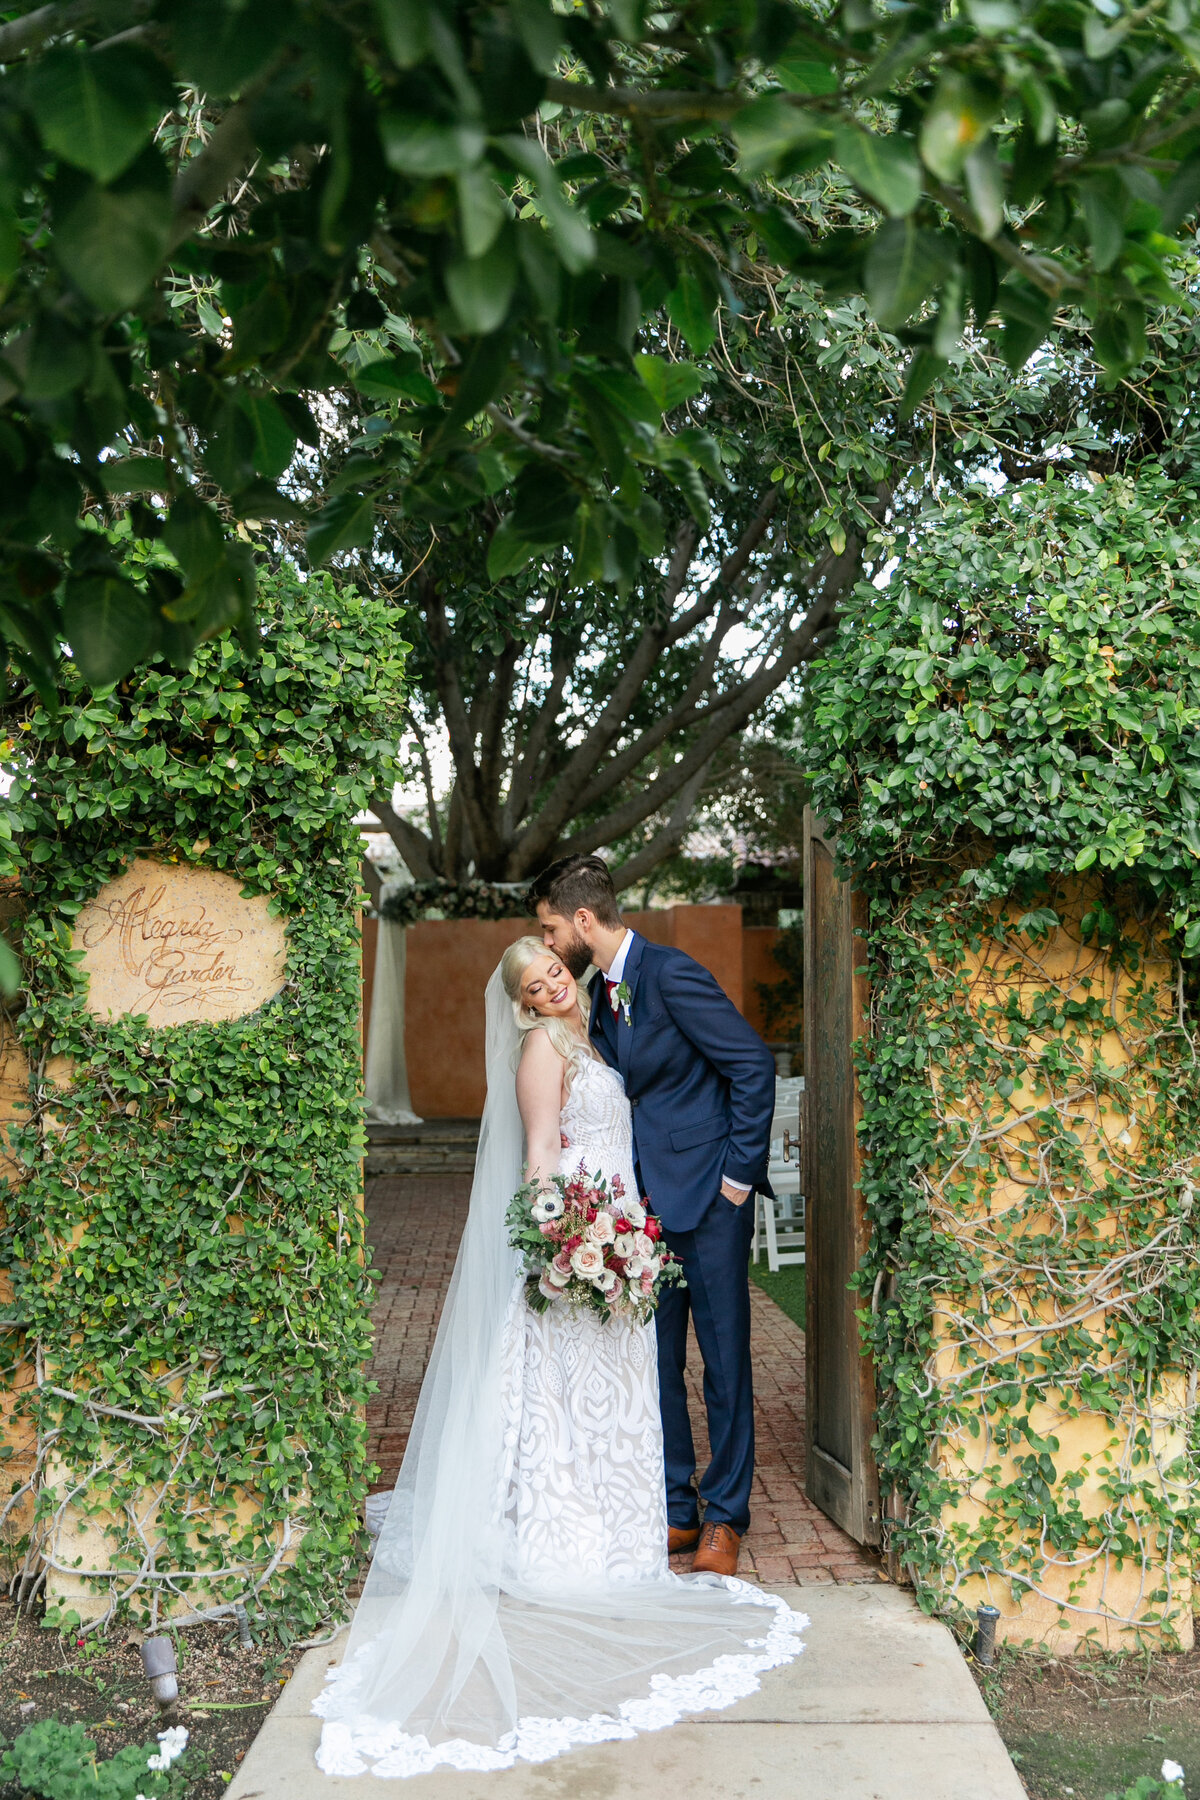 Karlie Colleen Photography - The Royal Palms Wedding - Some Like It Classic - Alex & Sam-478